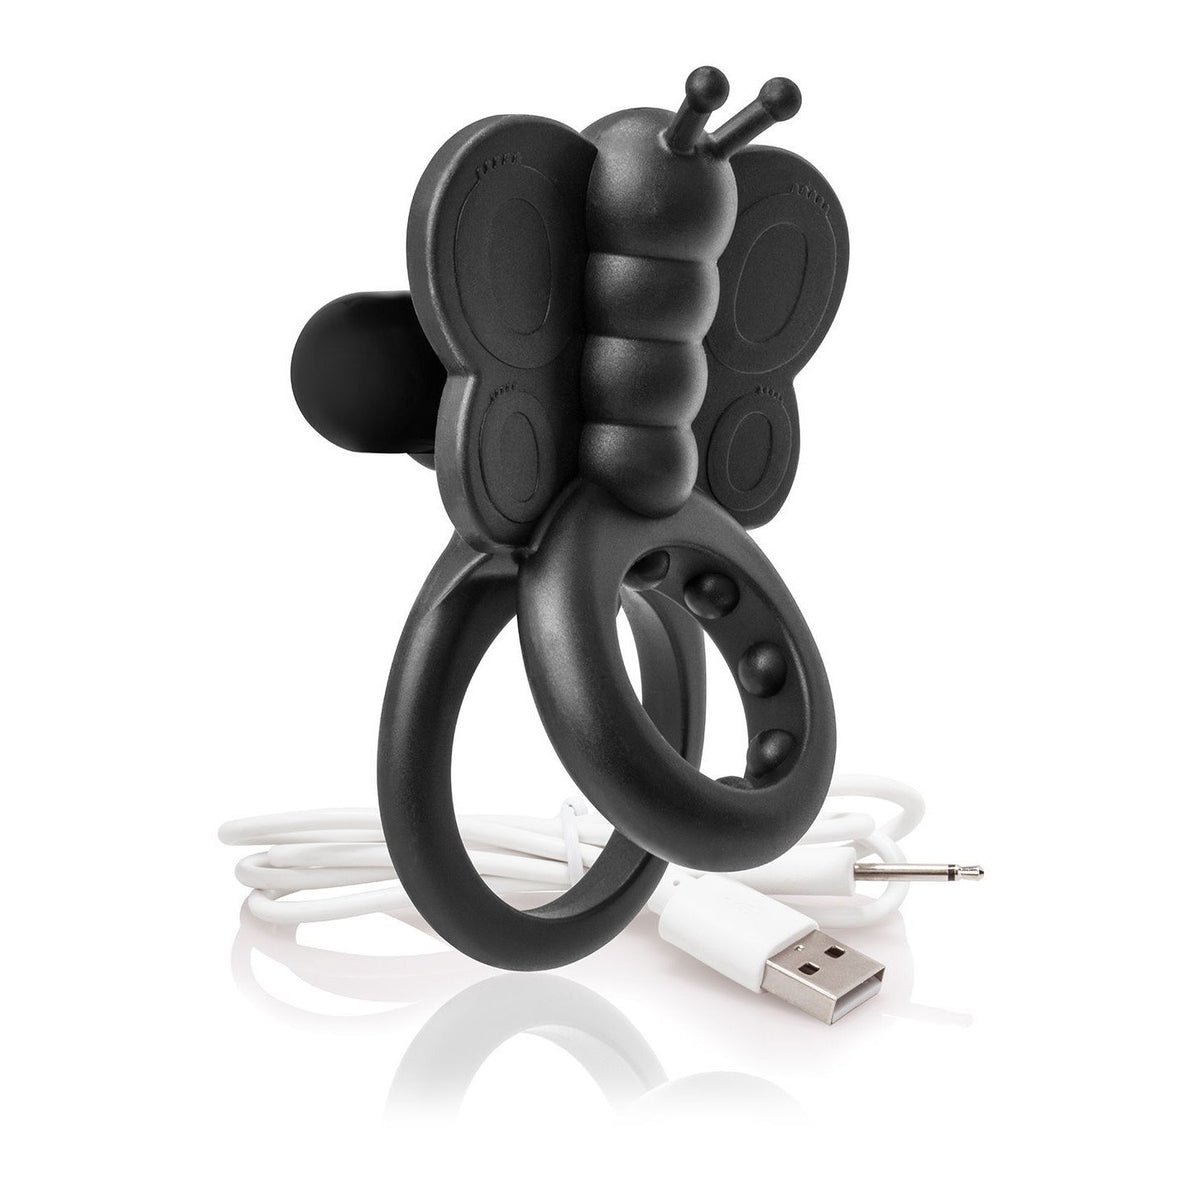 TheScreamingO - Charged Monarch Rechargeable Butterfly Cock Ring (Black) TSO1099 CherryAffairs